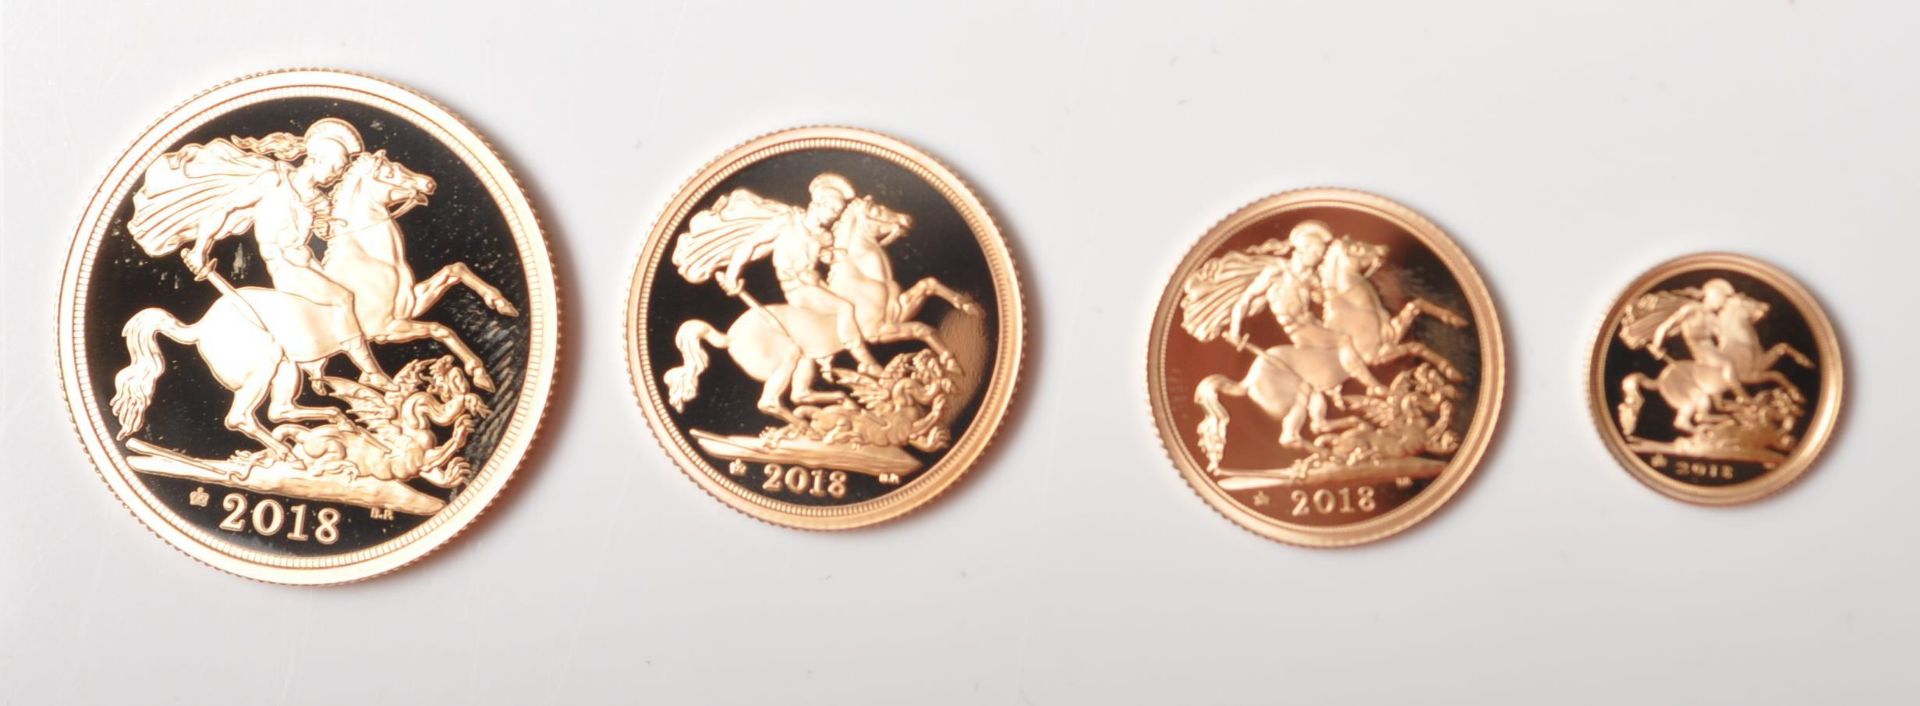 2018 FOUR COIN GOLD PROOF SOVEREIGN SET - Image 2 of 8